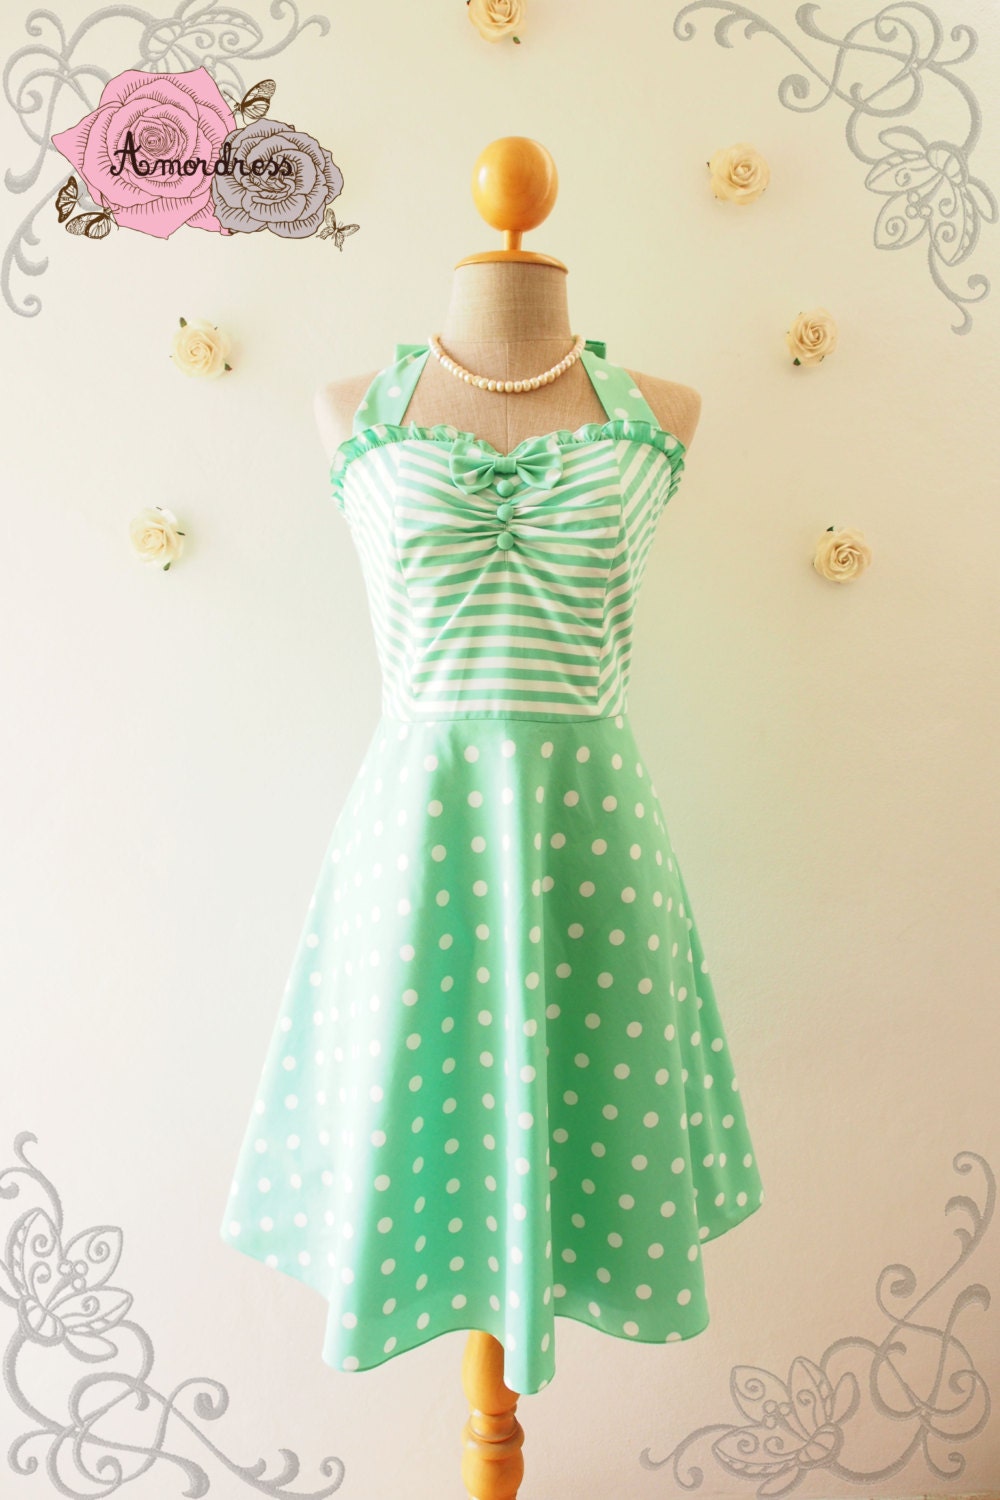 SALE The Circus Party Dress Sea Foam Green Dress by Amordress